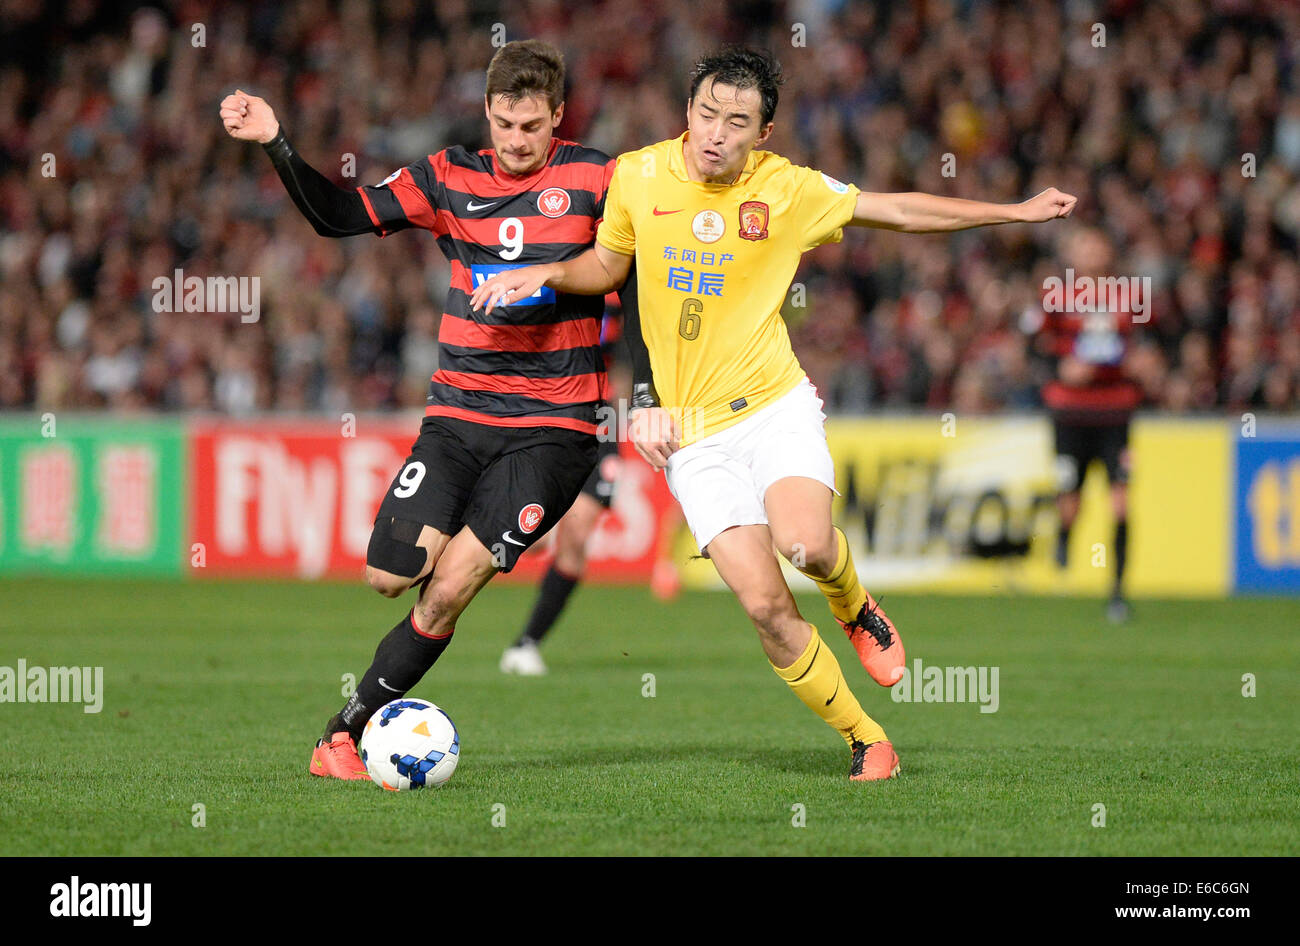 Sydney, Australia. 20th Aug, 2014. AFC Champions League Quarter Final 1st leg. Western Sydney Wanderers versus Guangzhou Evergrande. Wanderers forward Tomi Juric and Evergrande defender Feng Xiaoting. The Wanderers won 1-0. Credit:  Action Plus Sports/Alamy Live News Stock Photo